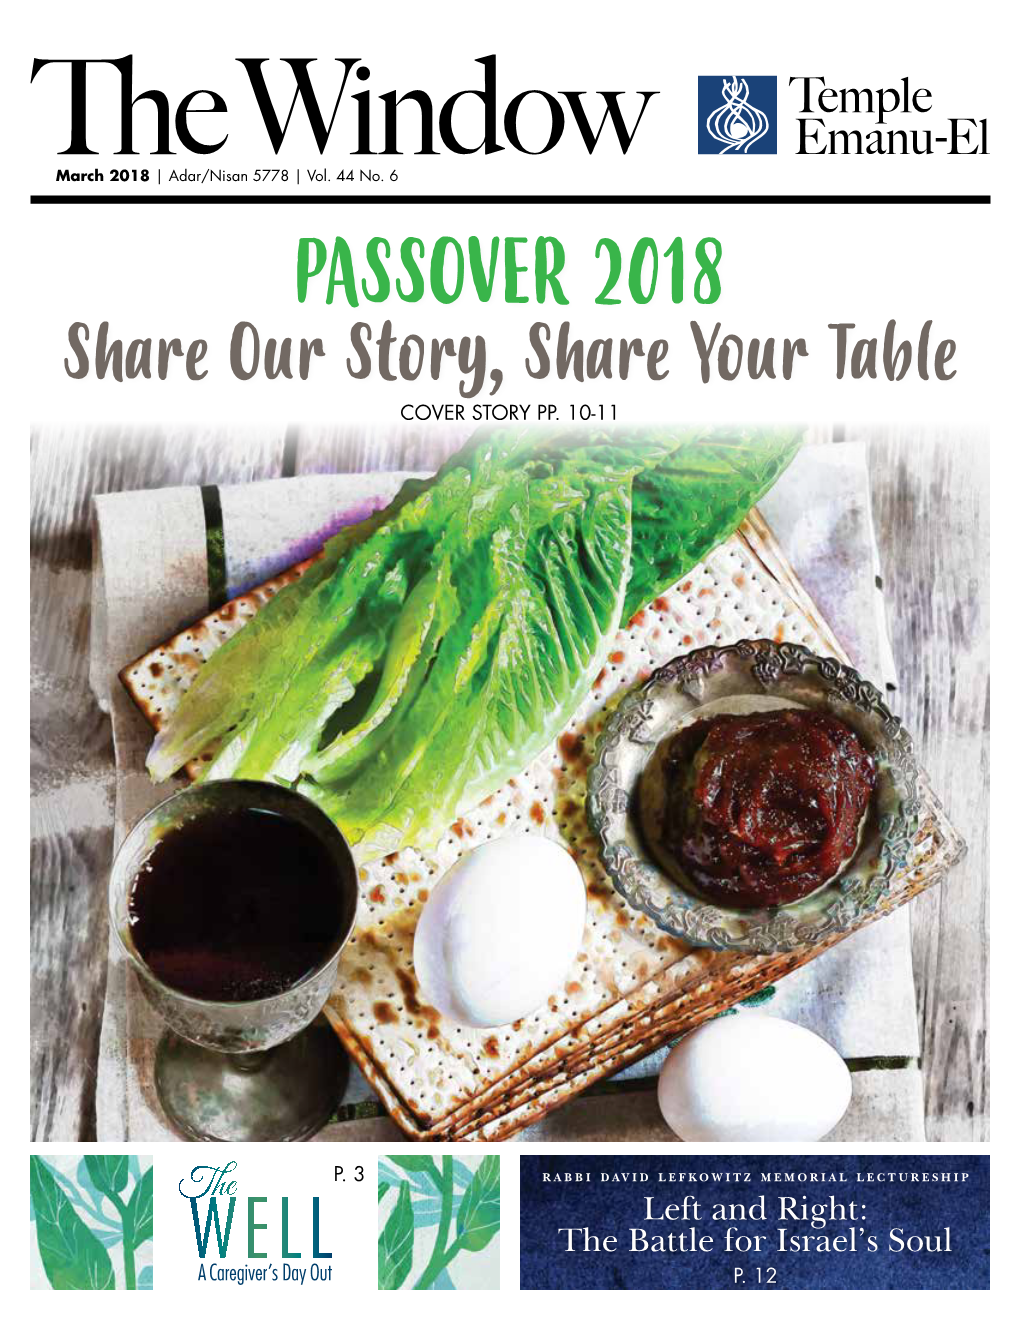 PASSOVER 2018 Share Our Story, Share Your Table COVER STORY PP